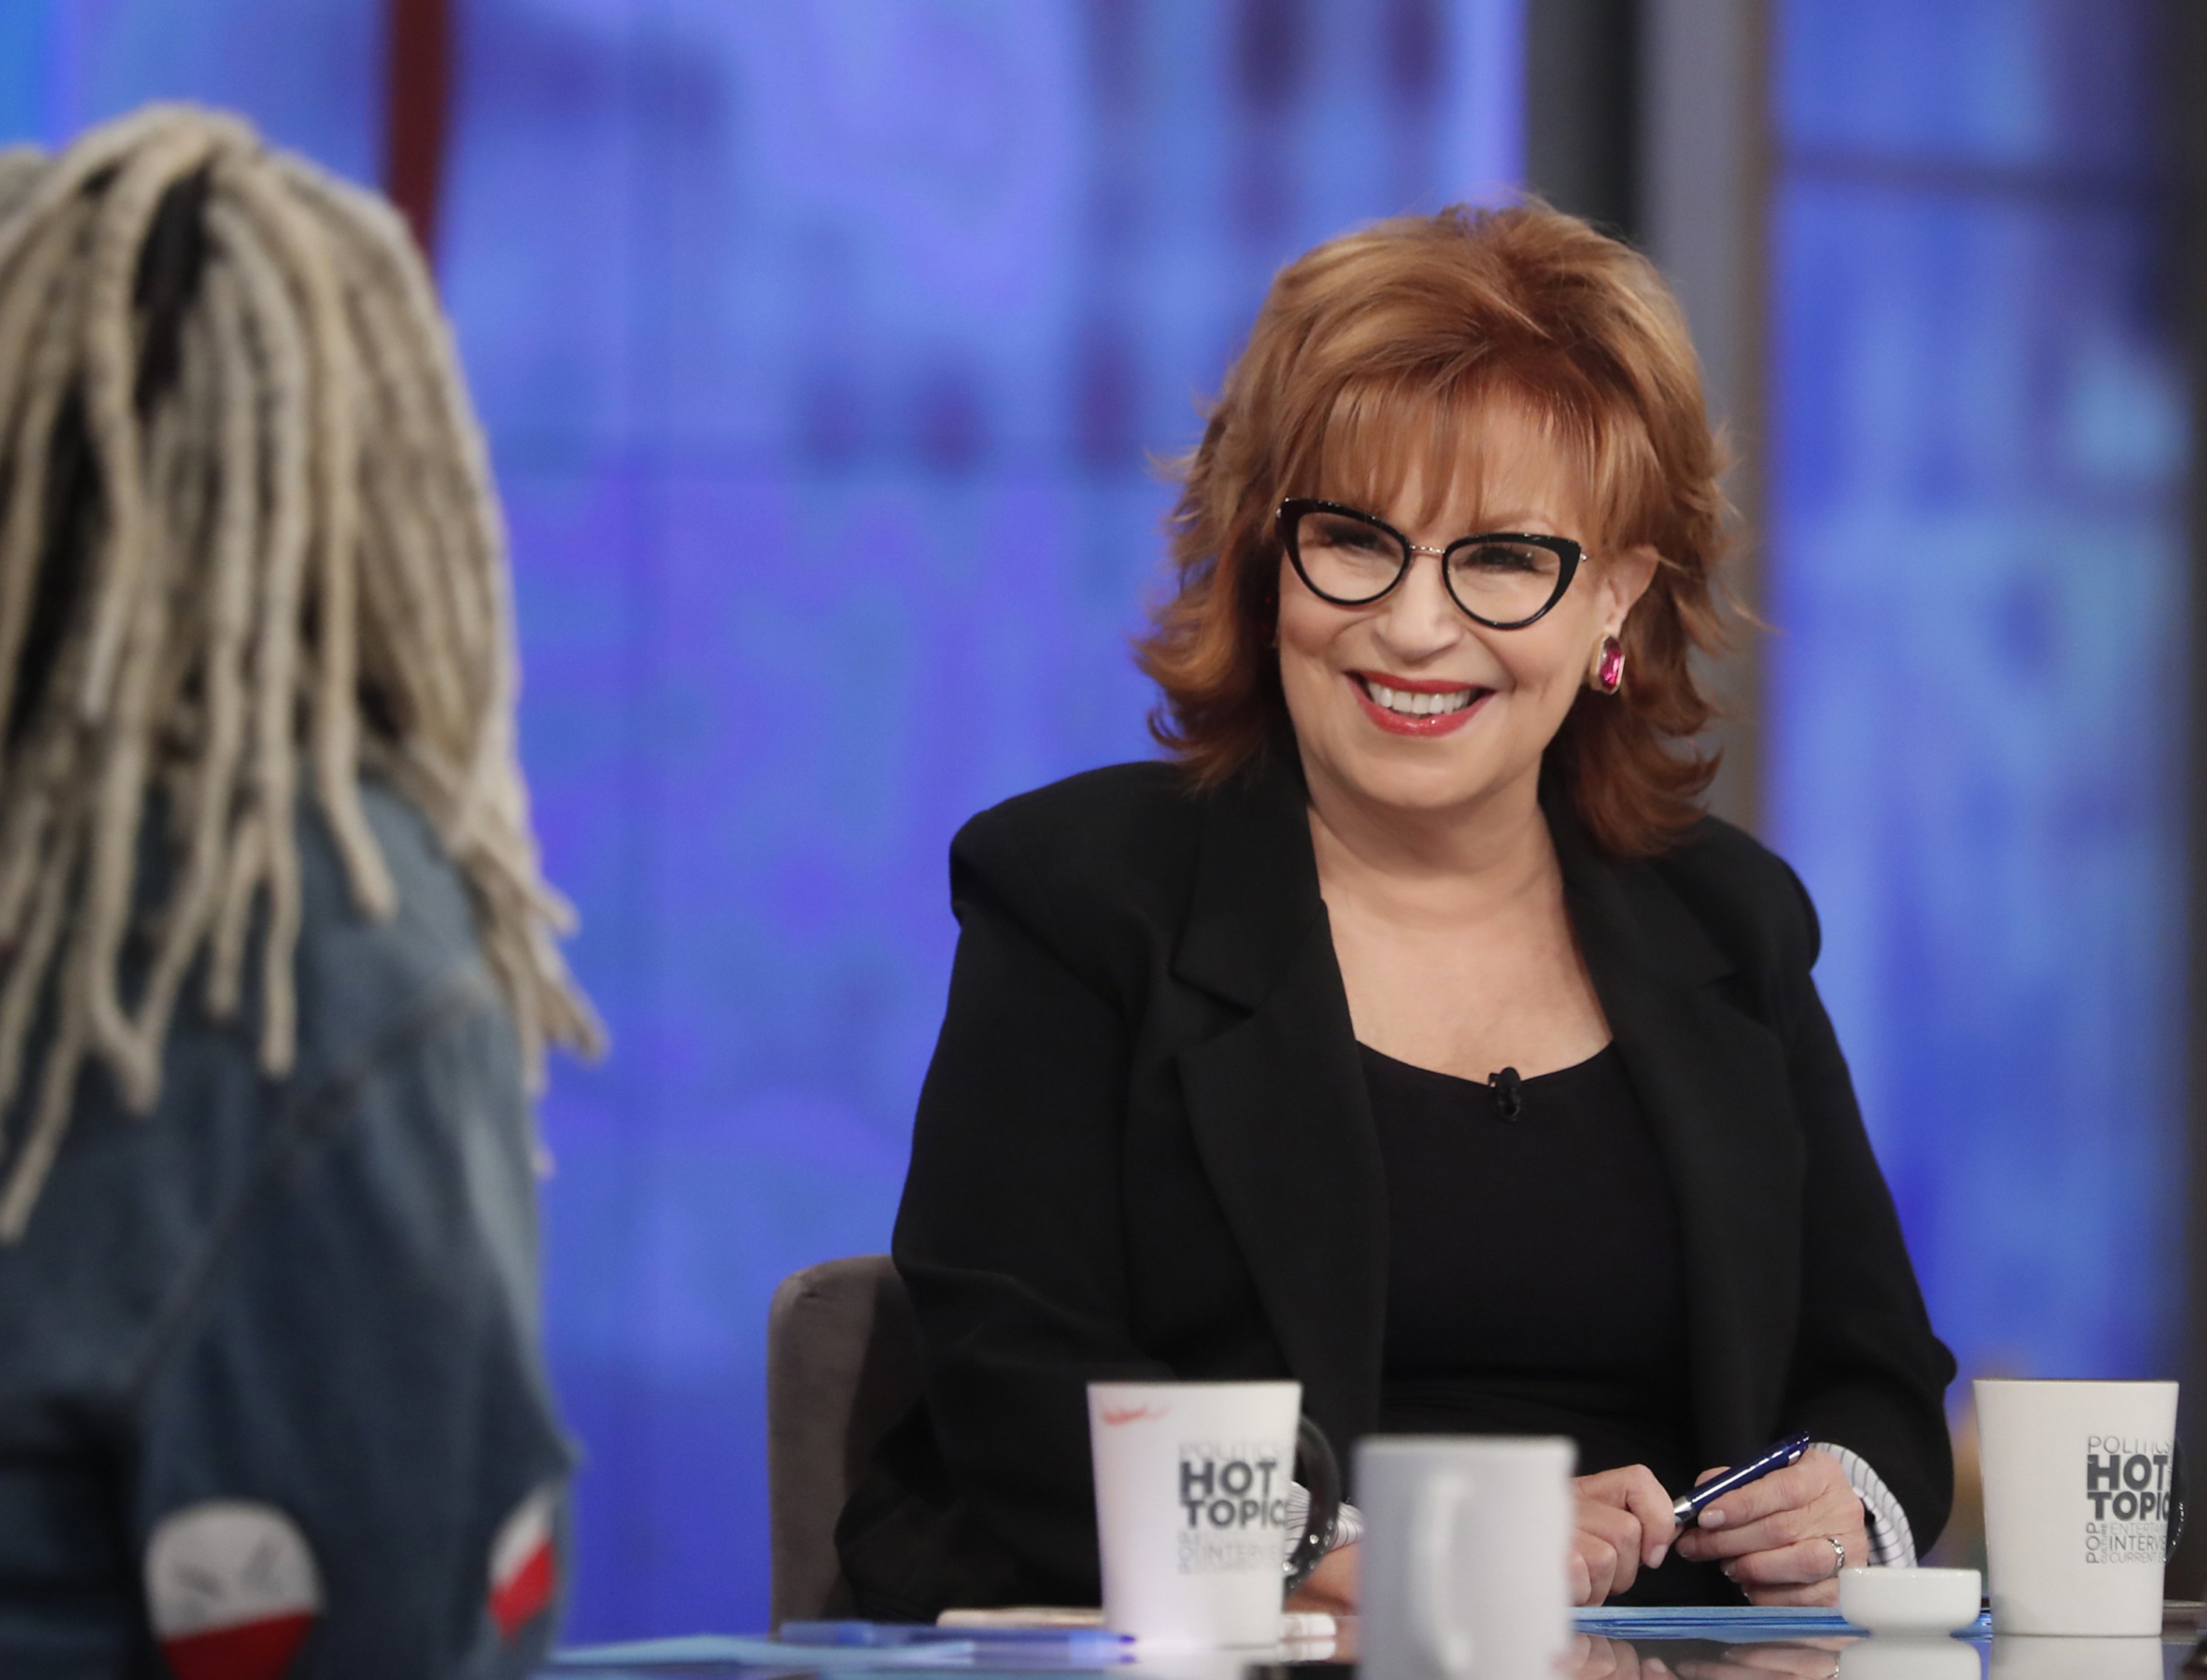 Joy Behar on "The View" on September 30, 2019 | Photo: Getty Images